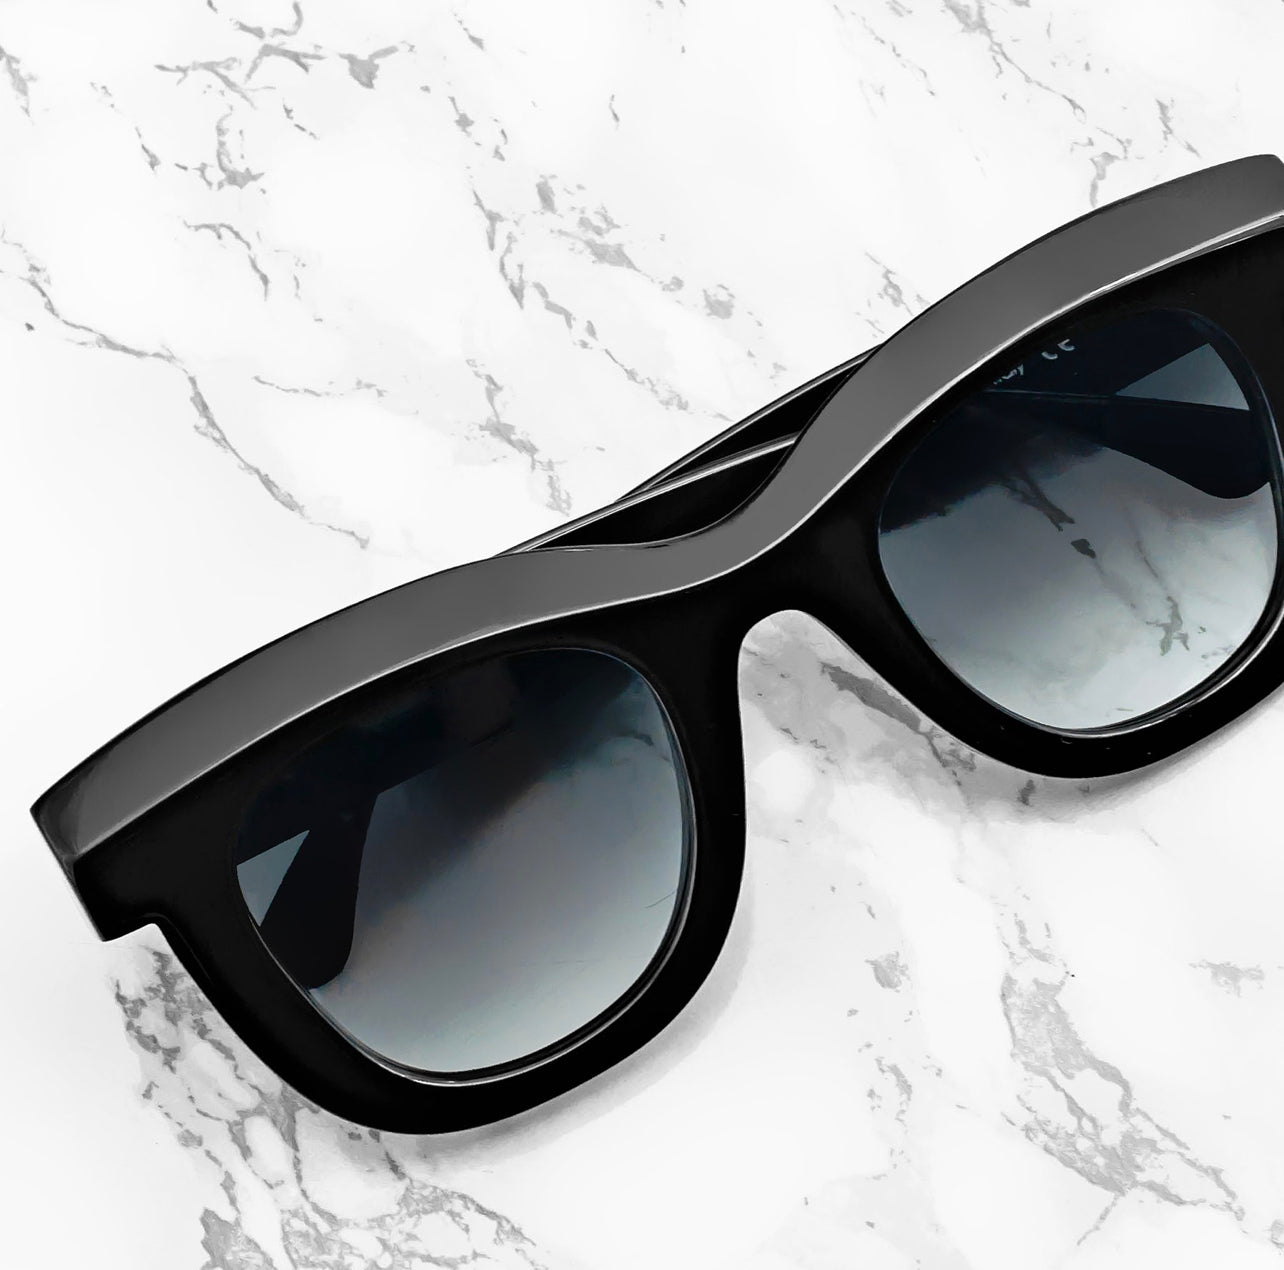 Thierry Lasry Saucy 101